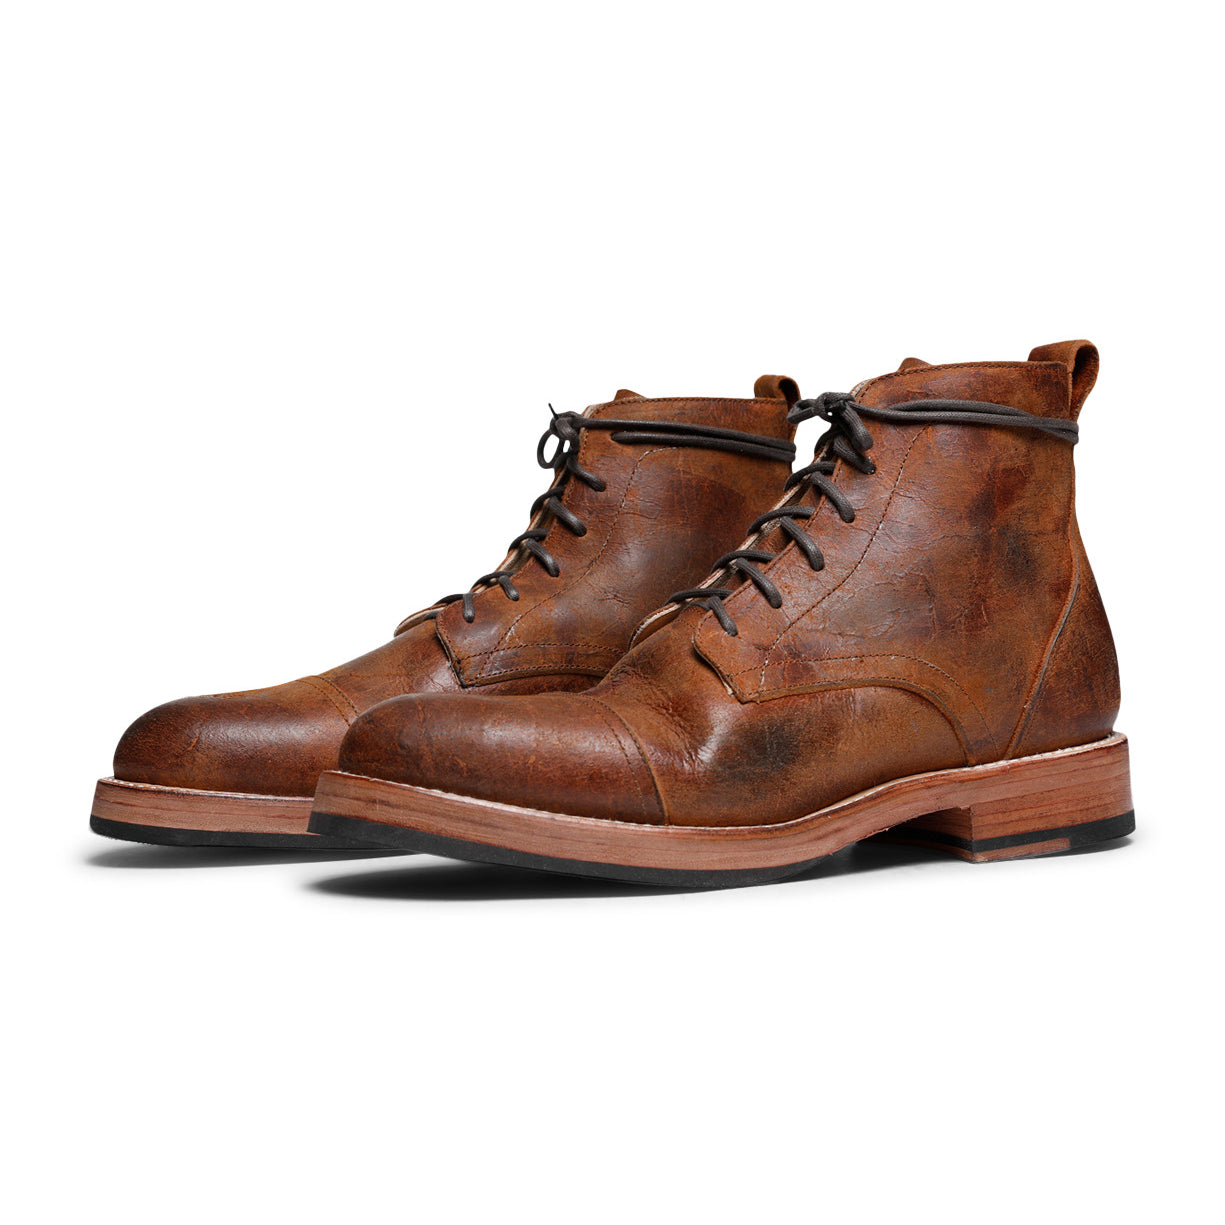 A pair of Larry Boot brown leather boots from Santa Rosa Brand with vegetable tanned lining on a white background.